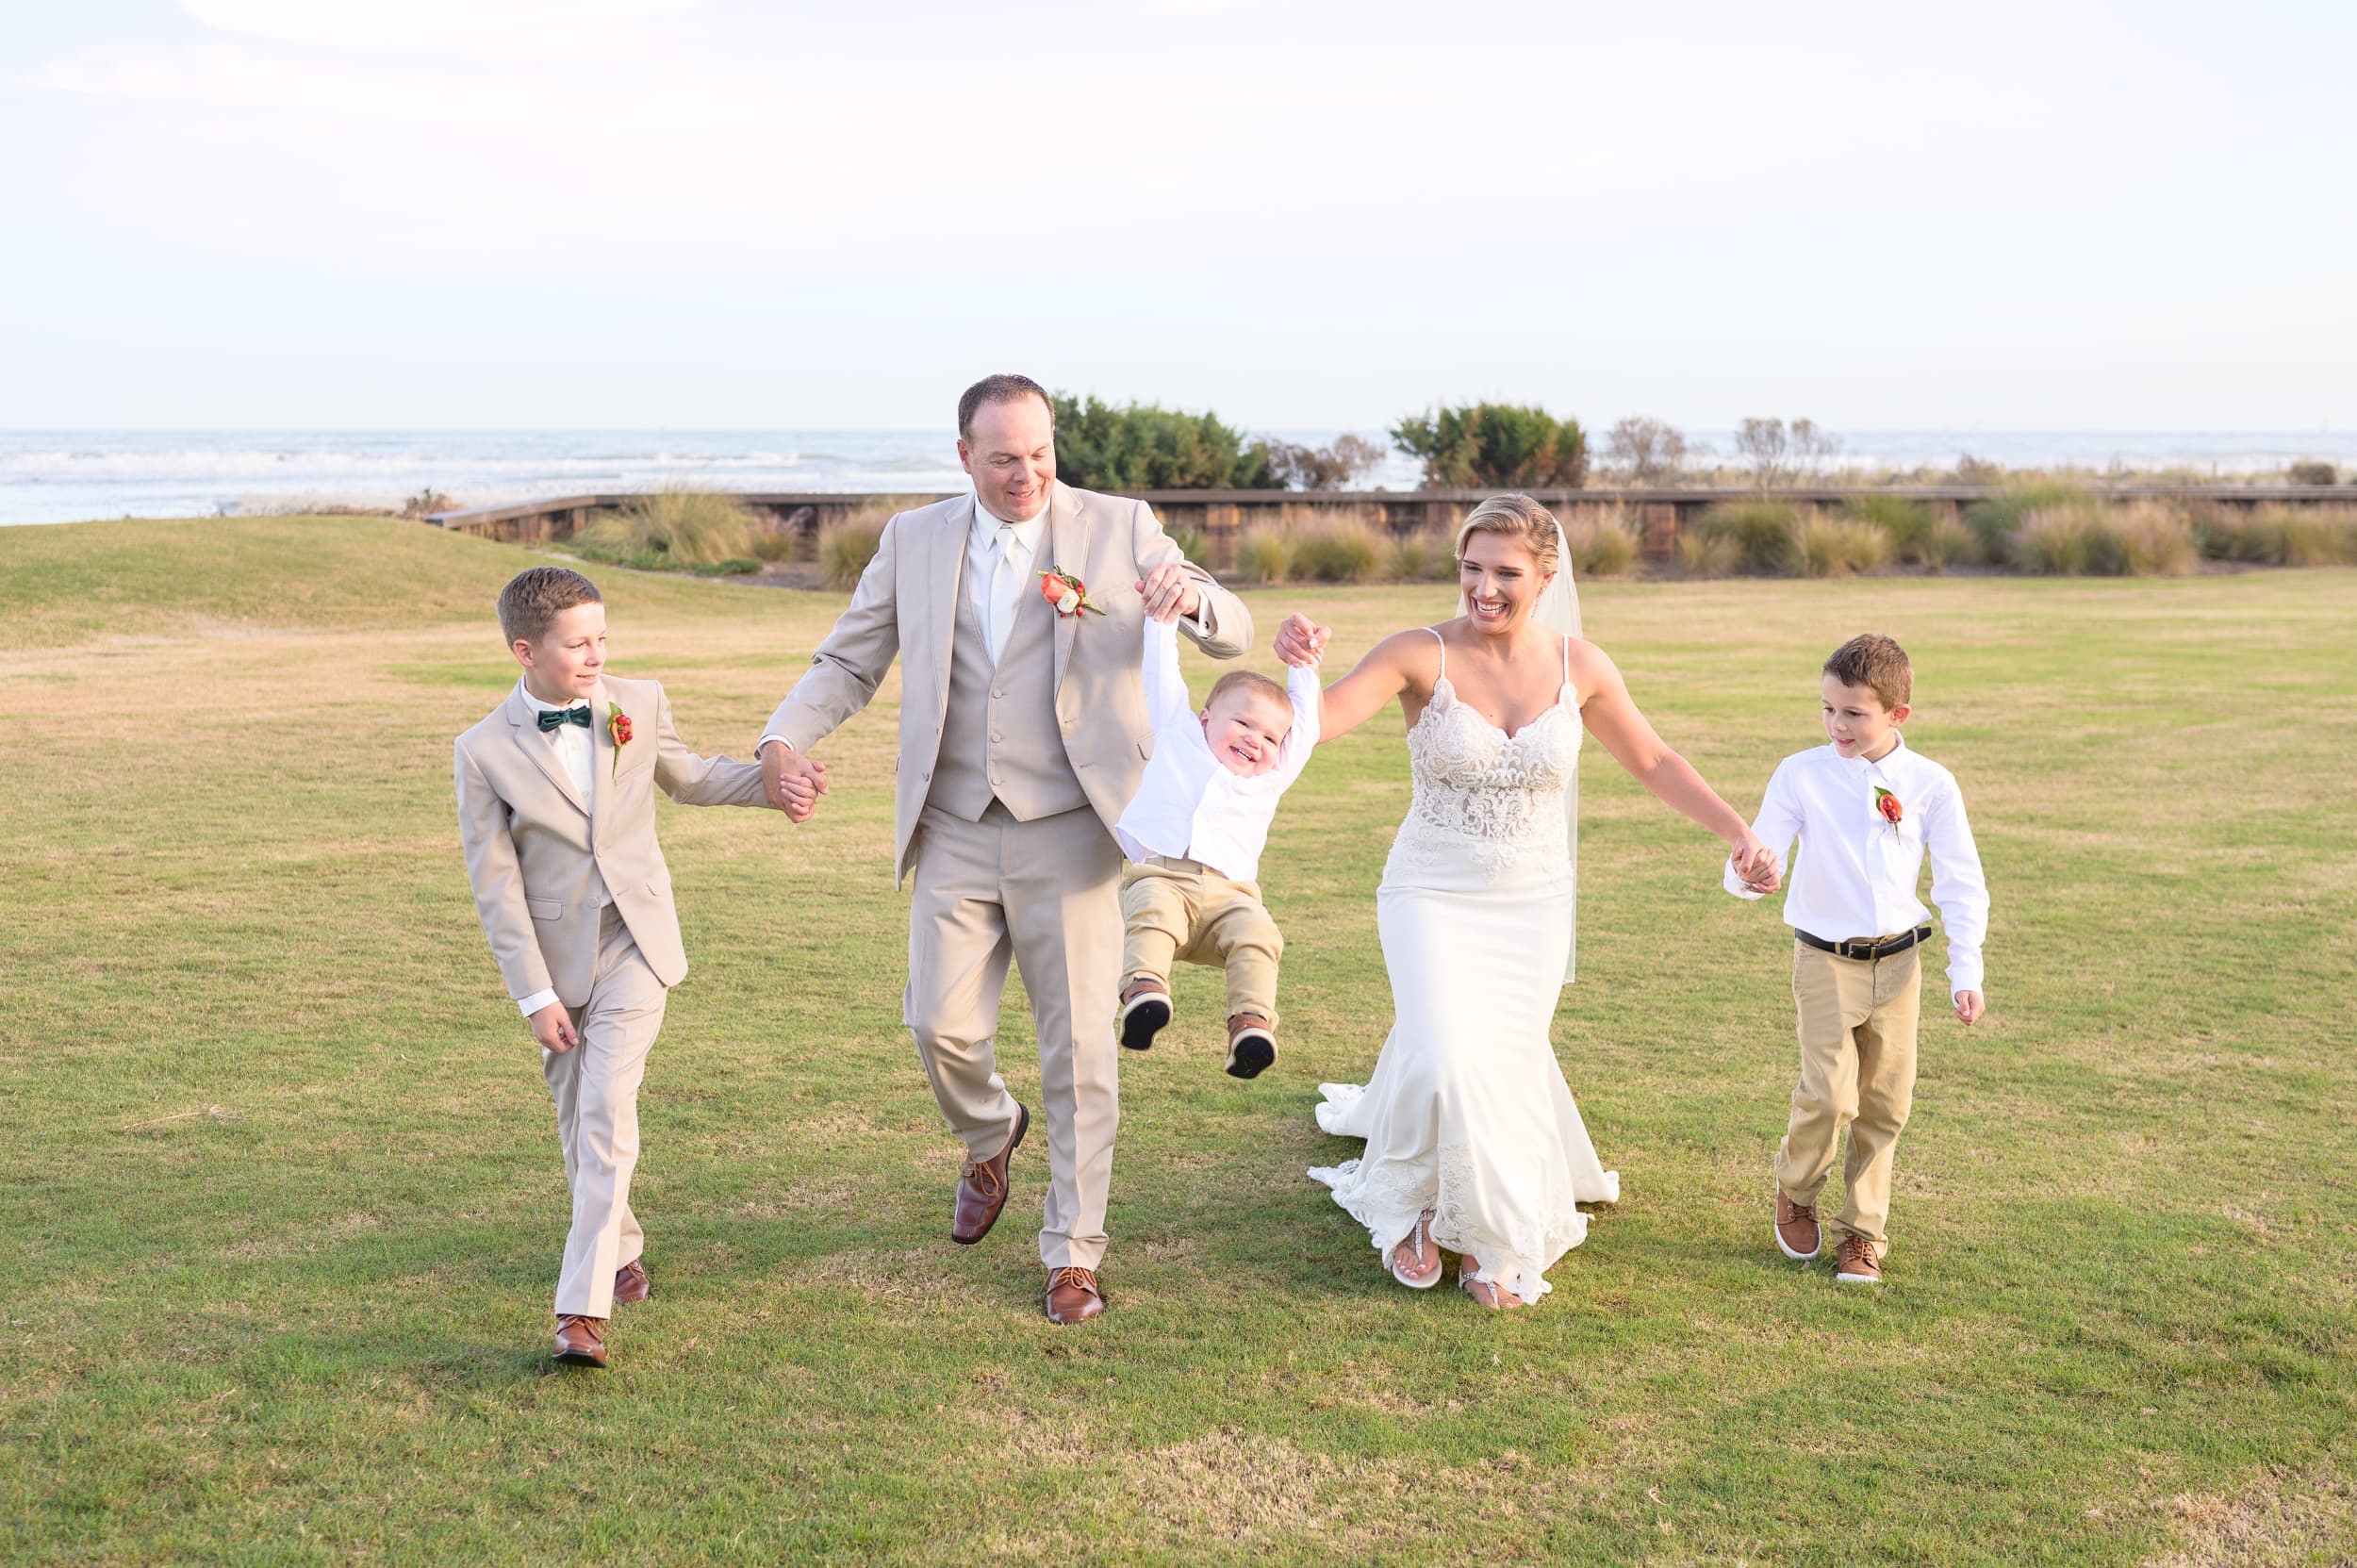 Happy new family of 5 having fun together after the wedding ceremony - Dunes Golf & Beach Club